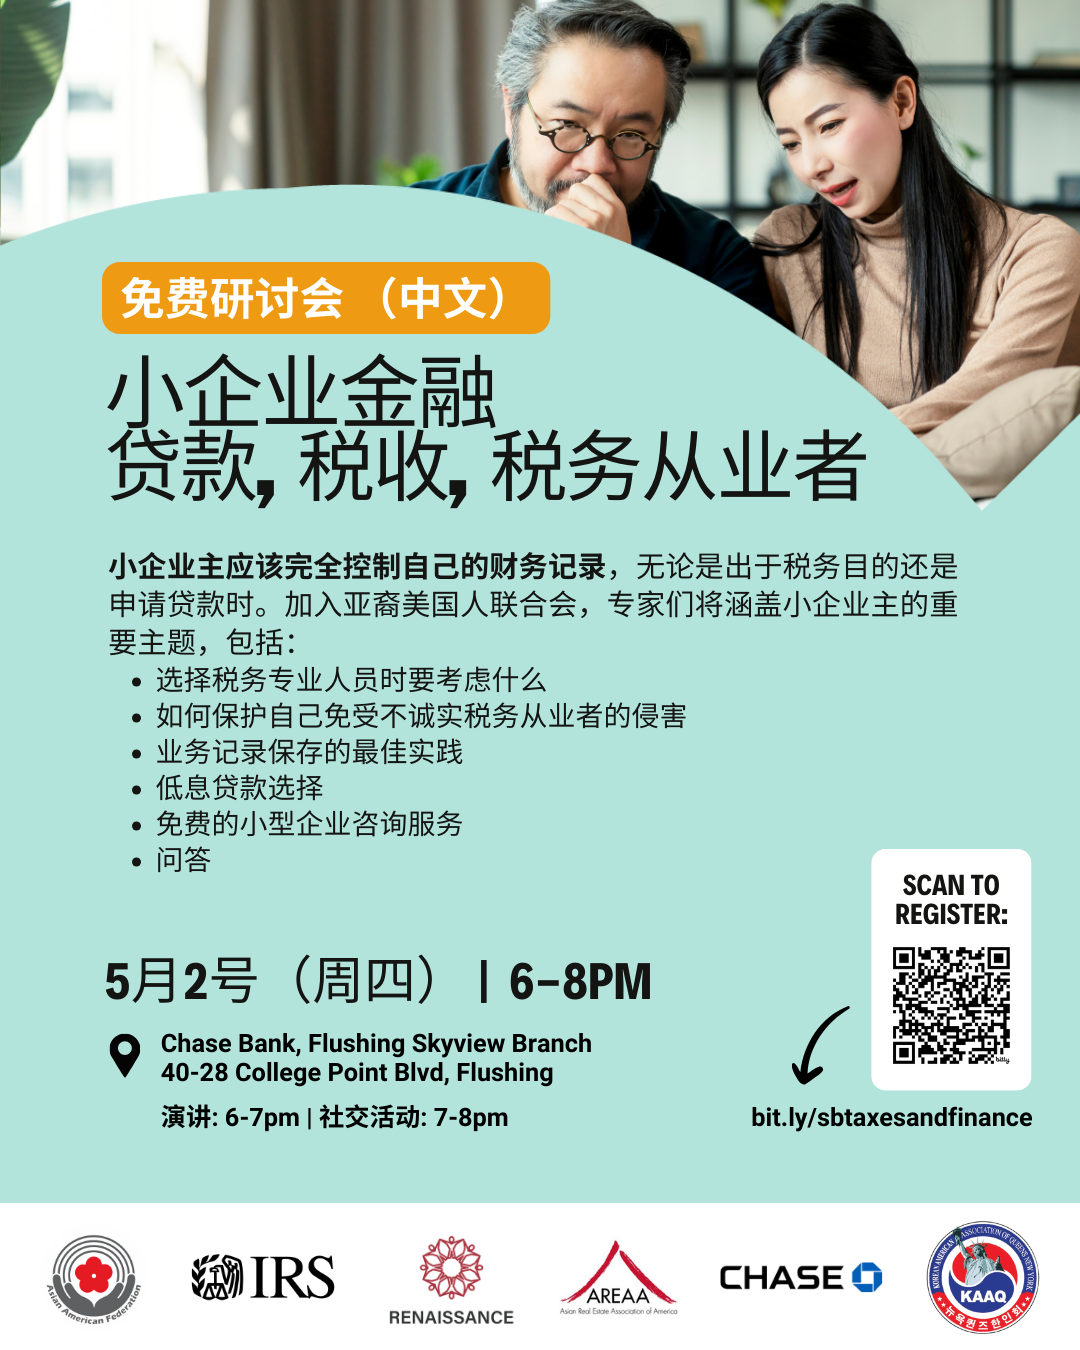 Flyer for Small Business Finance Seminar Series on 5/2, brought to you by the Asian American Federation, the Internal Revenue Service (IRS), Renaissance CDC (REDC), Chase Bank, Korean American Association of Queens NY, and AREAA Brooklyn Chapter.